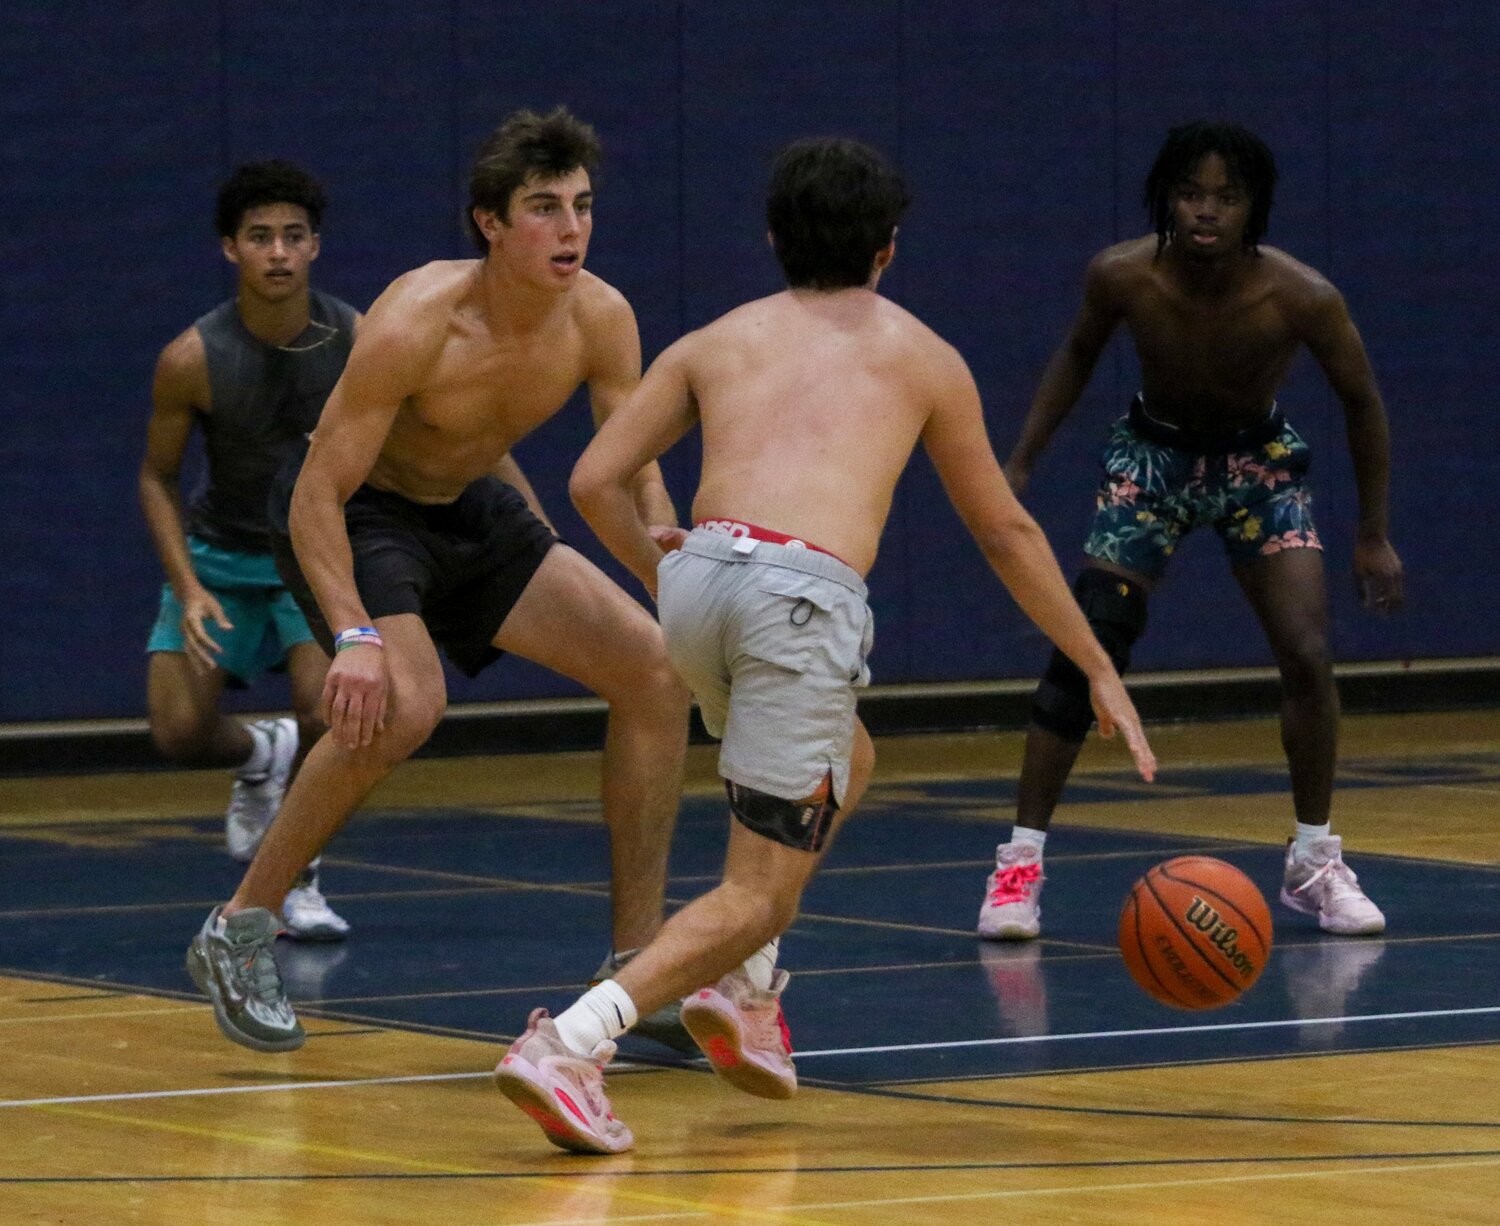 Monday marked the first day of winter sports practices for the Whalers basketball, hockey and swimming and diving teams.